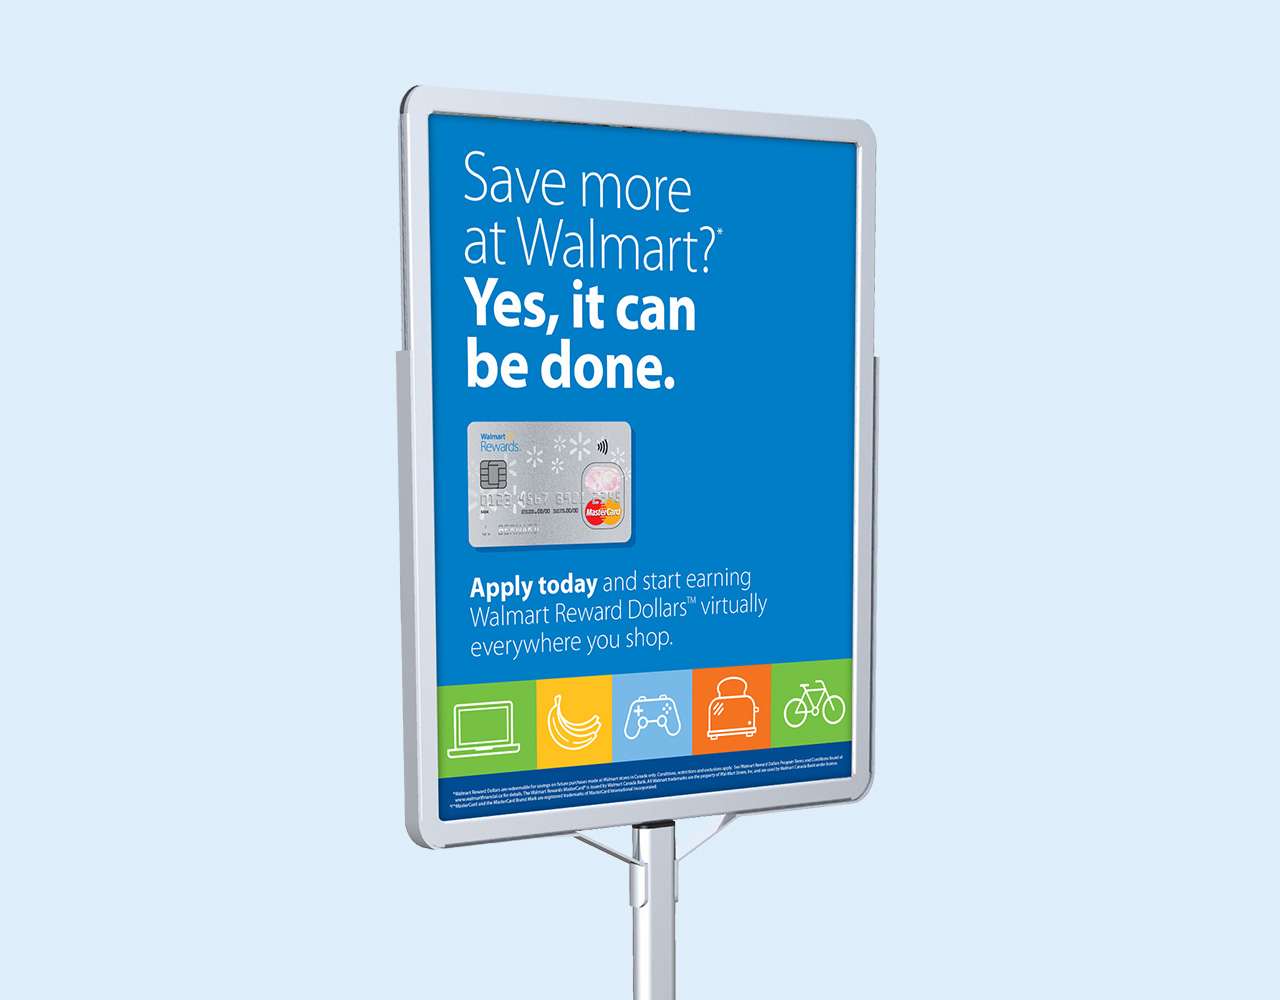 Mockup of a sign holder with a blue poster advertising a Walmart Rewards credit card